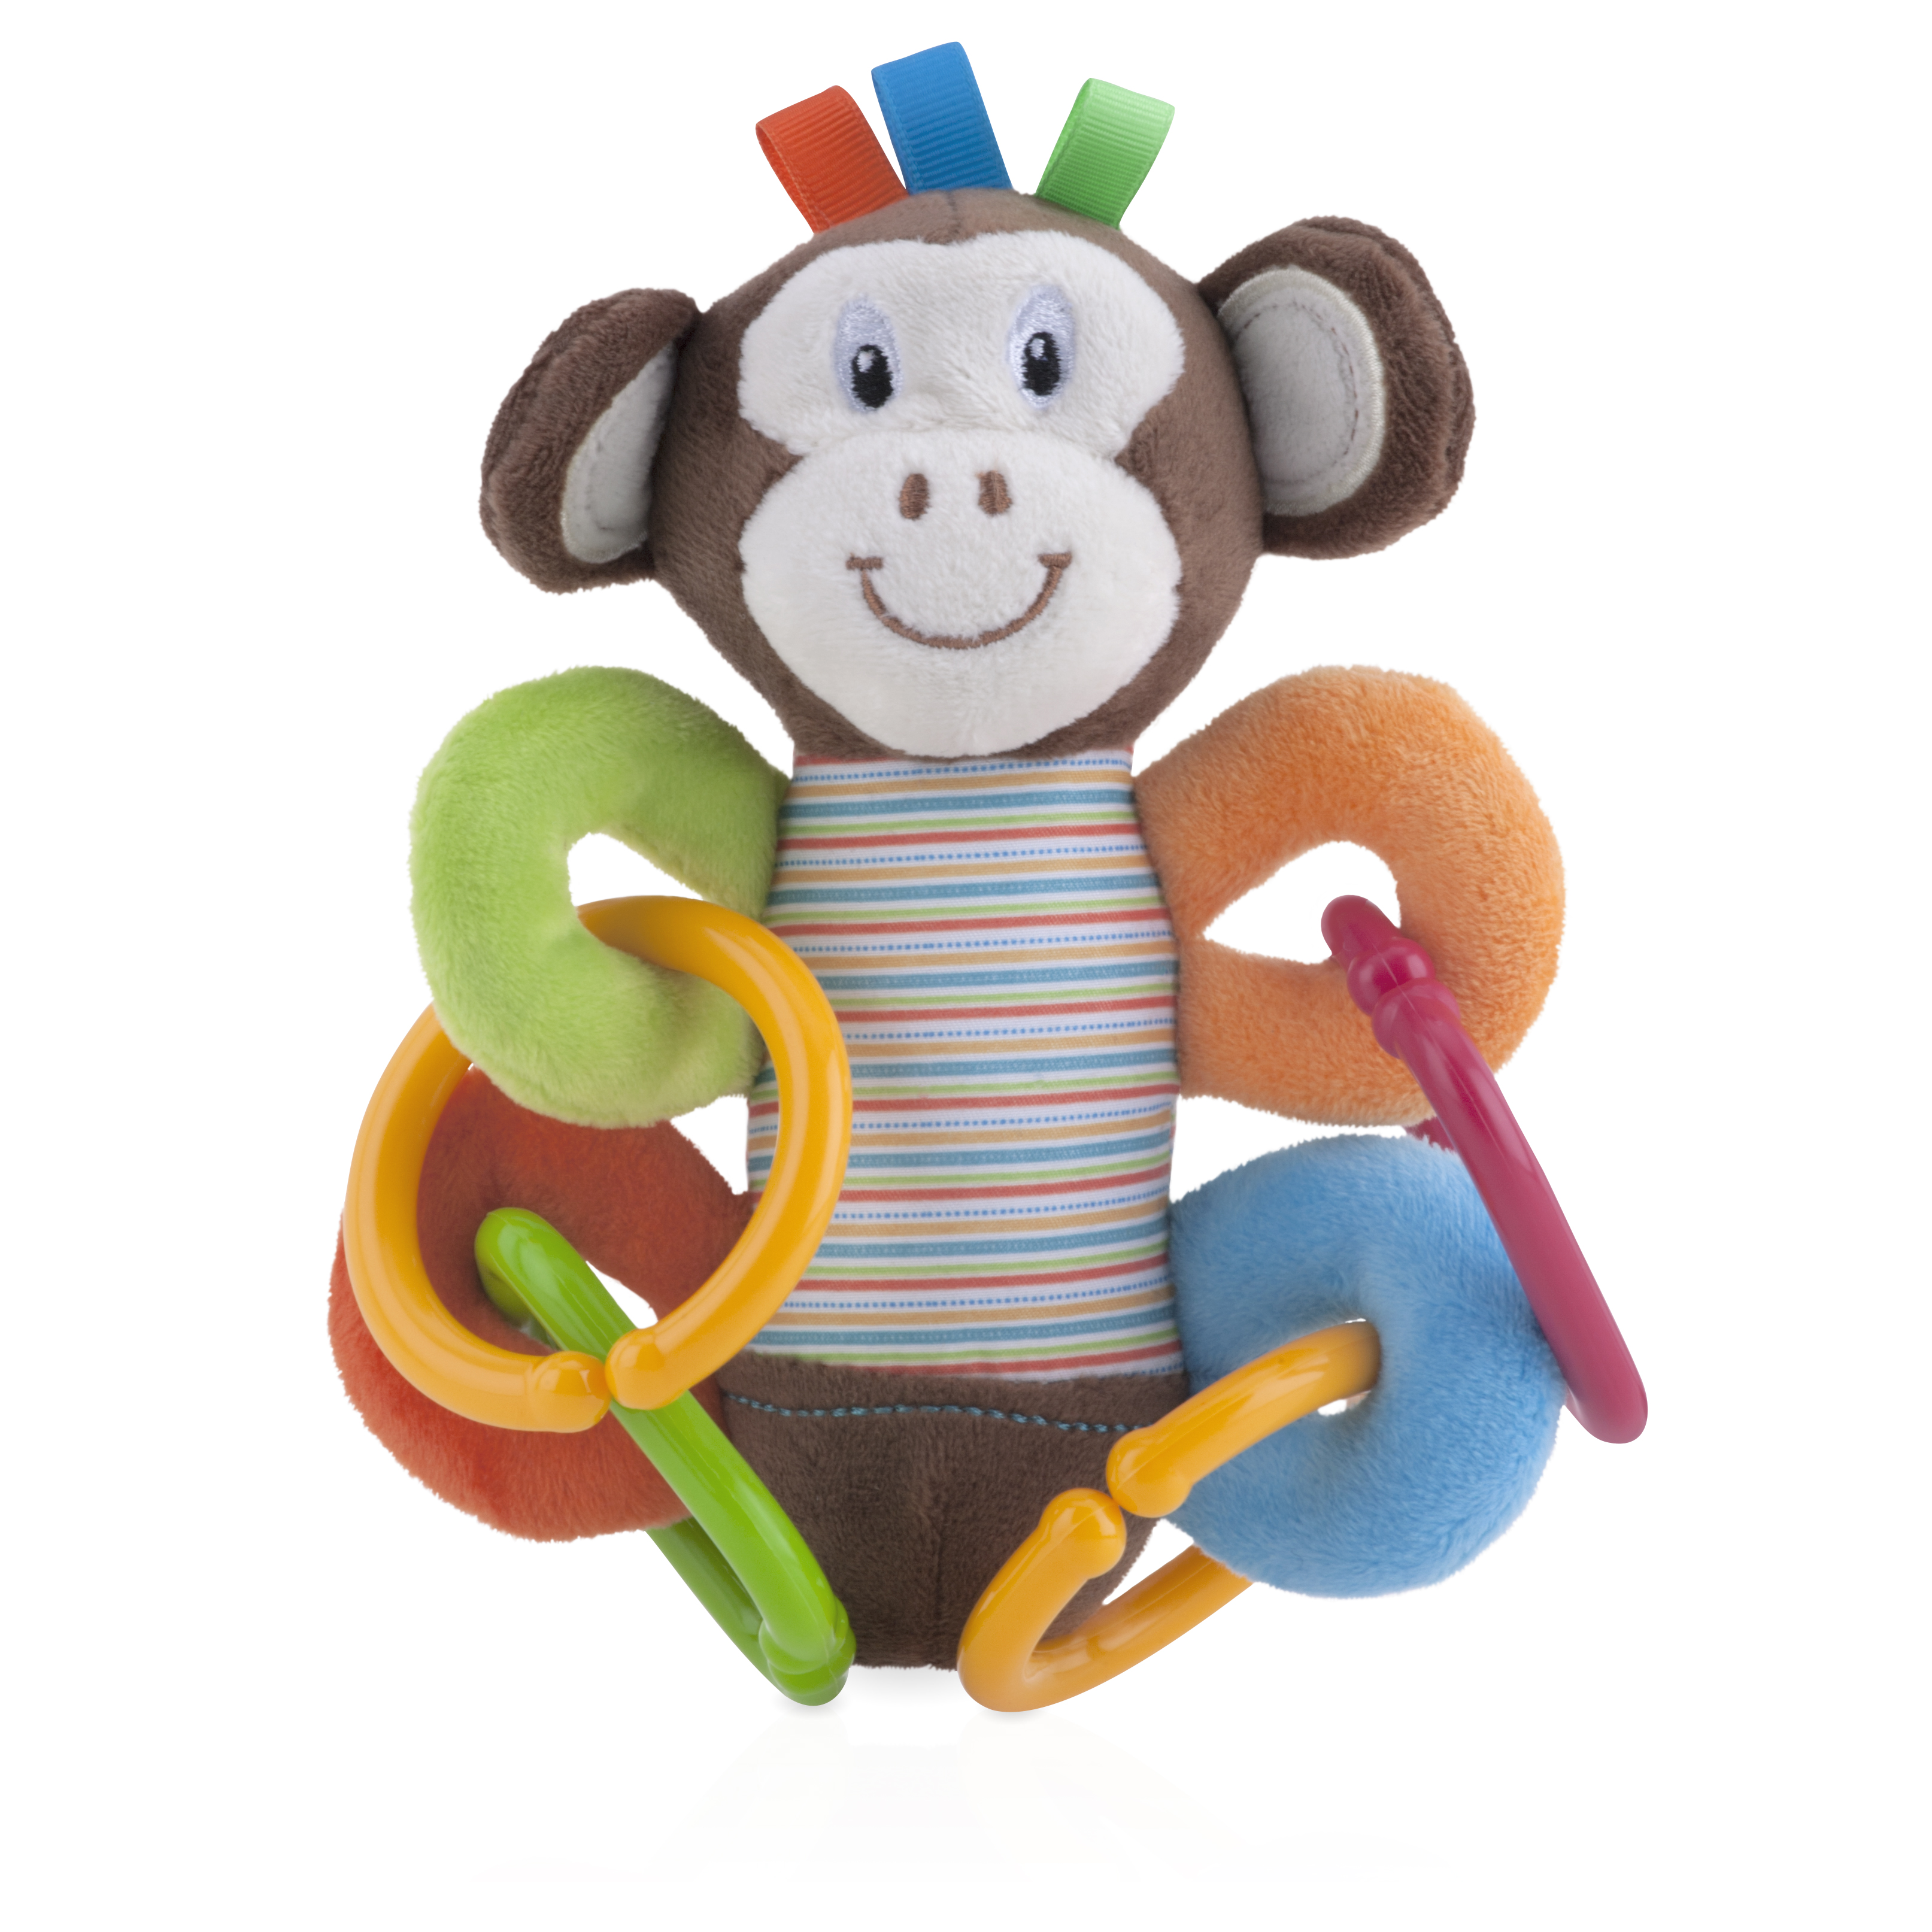 Nuby Squeeze N' Squeak, Styles May Vary - image 1 of 7